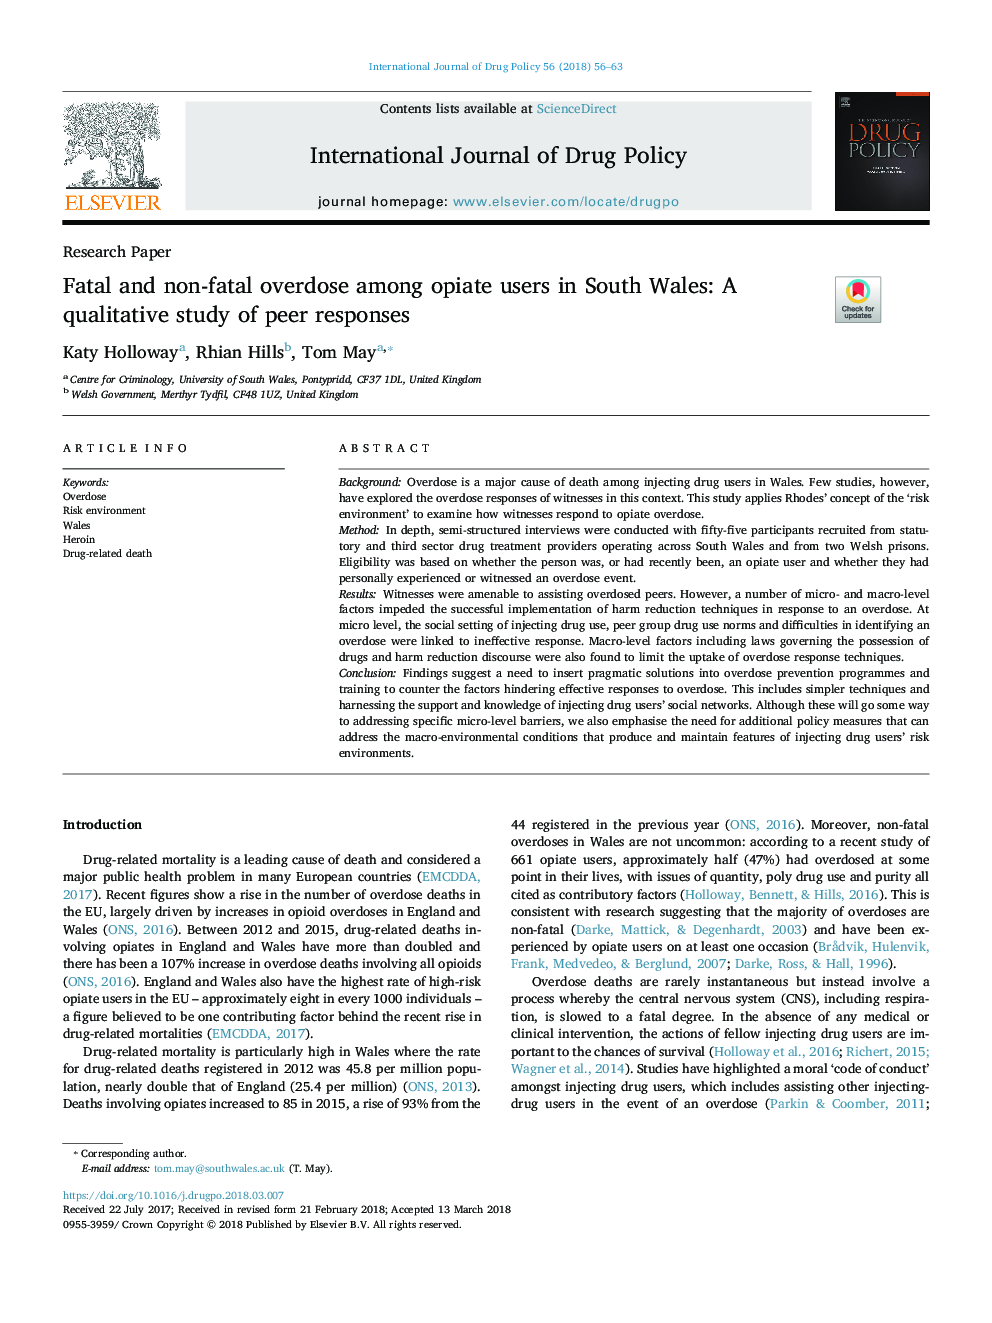 Fatal and non-fatal overdose among opiate users in South Wales: A qualitative study of peer responses